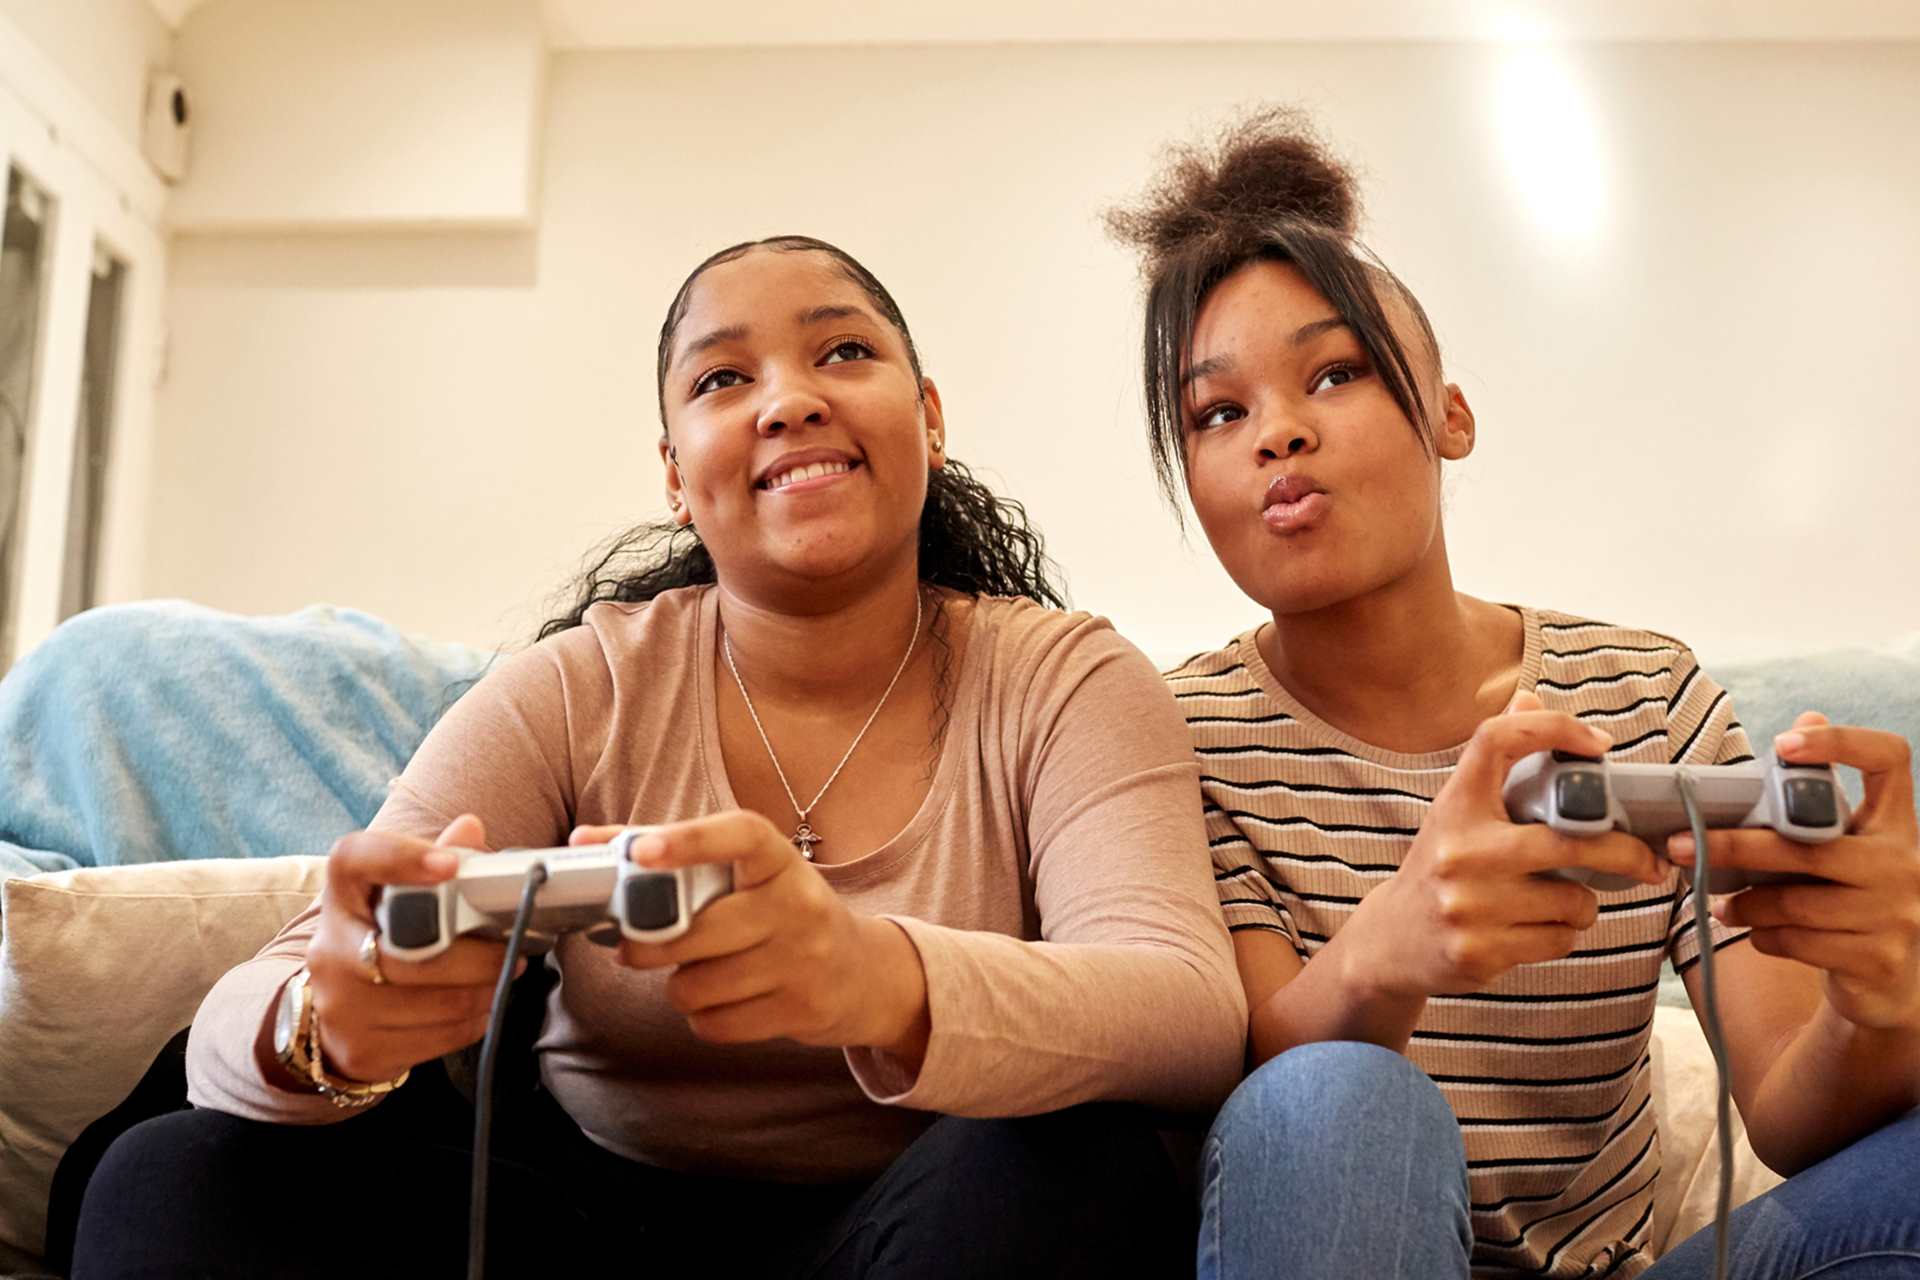 Two young people playing PlayStation on the sofa.